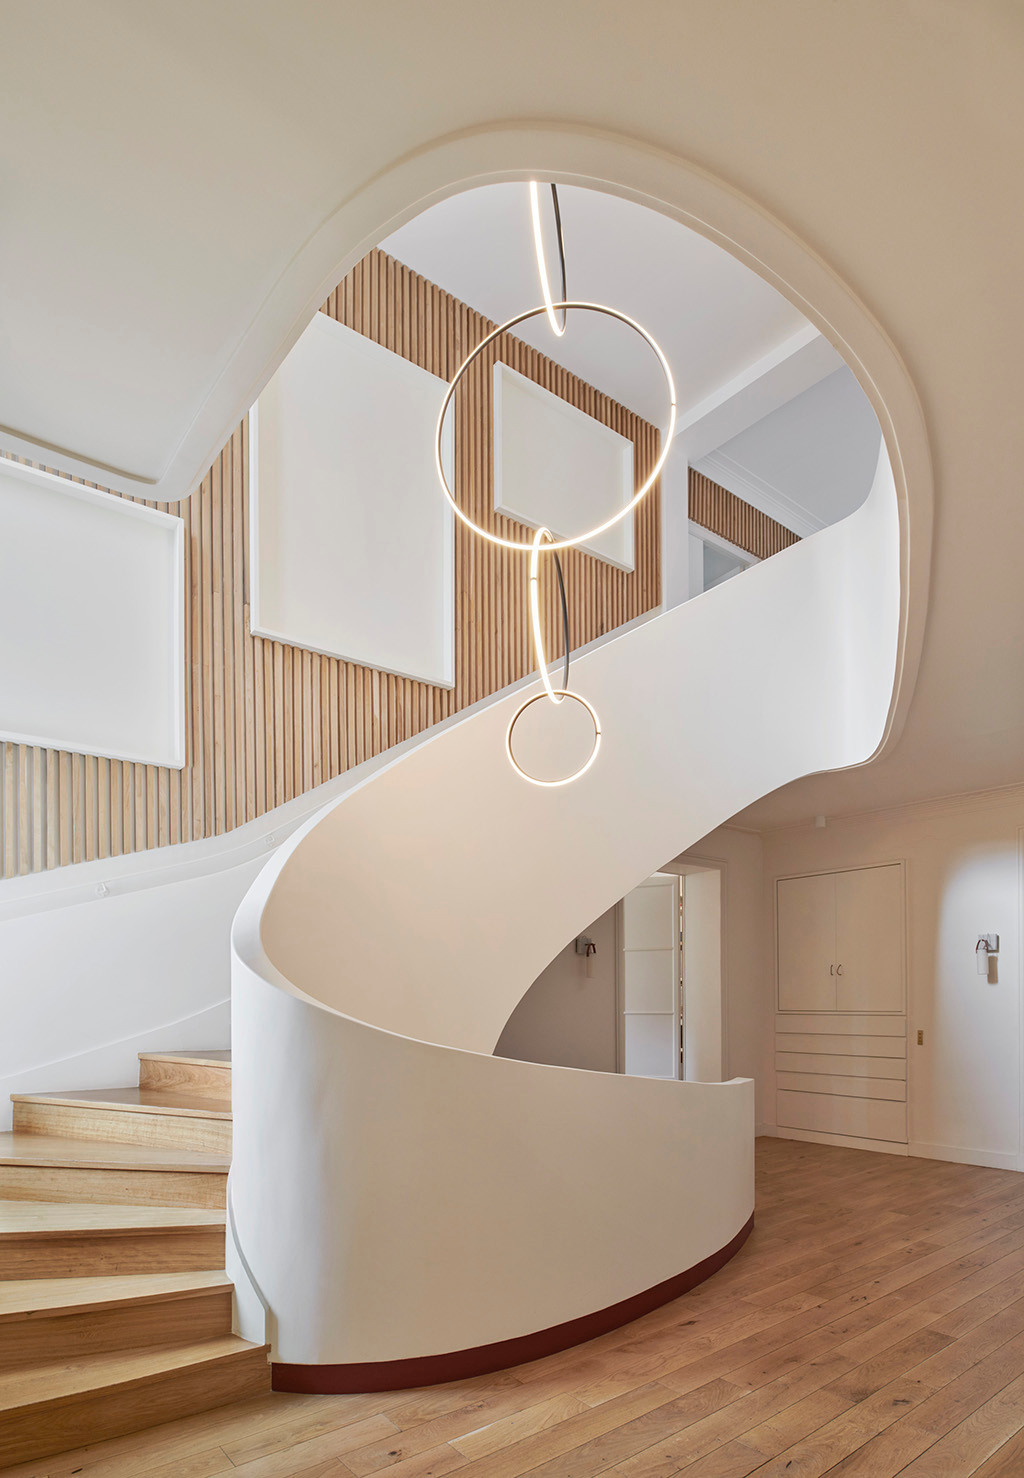 20 Elegant Contemporary Staircase Designs That Are Just Out Of This World